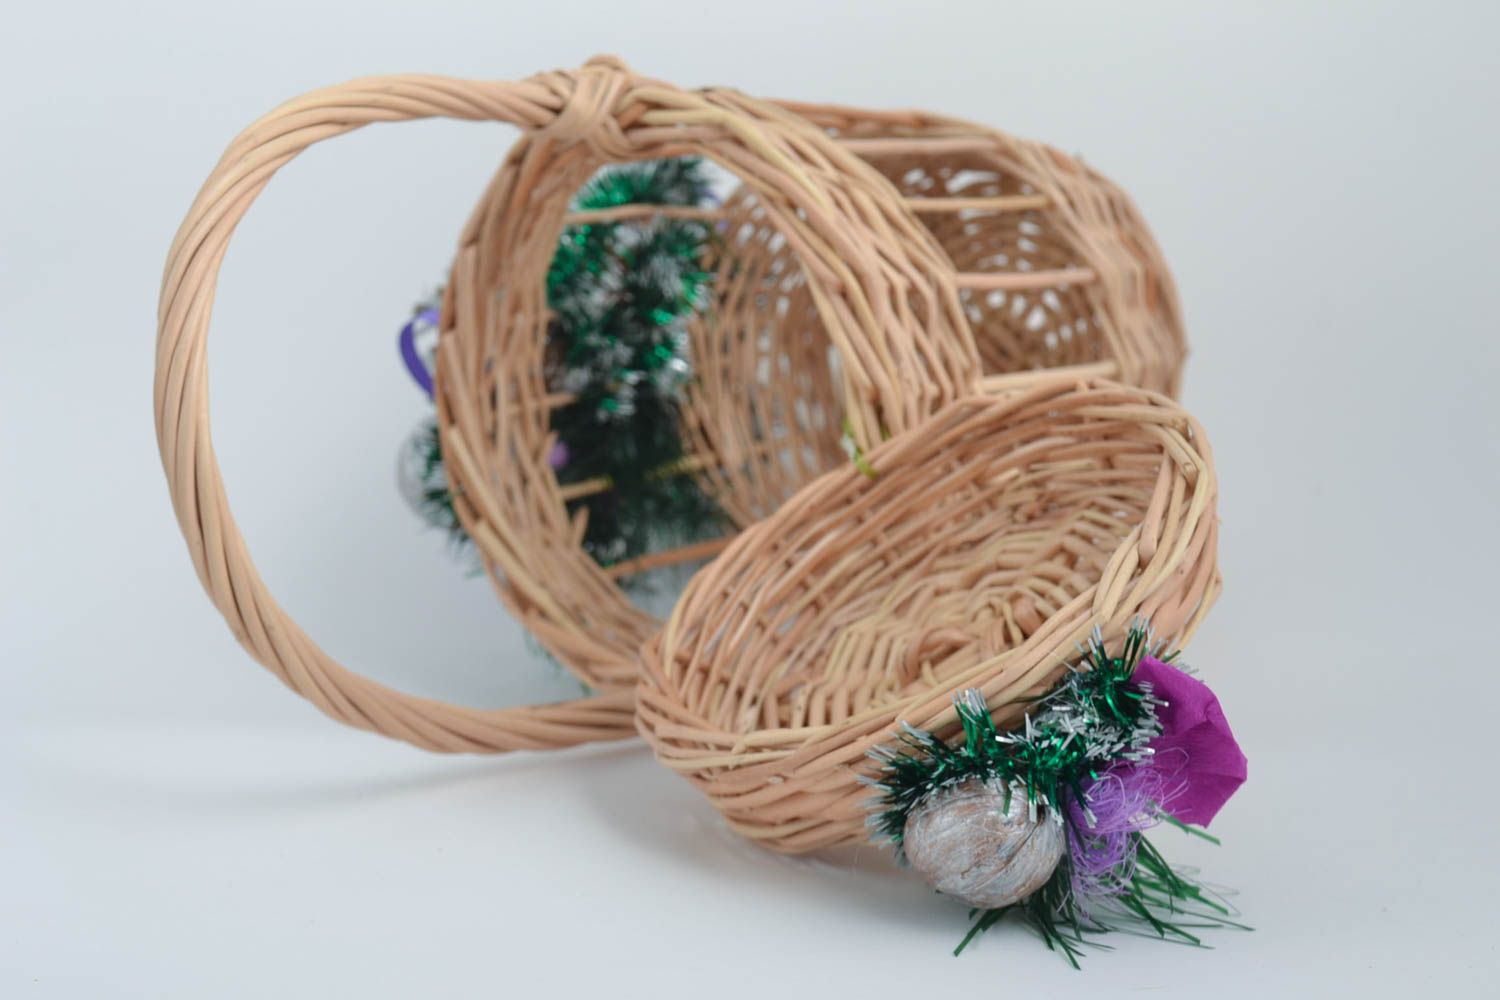 Unusual handmade woven basket with lid Easter basket ideas Easter gift ideas photo 4